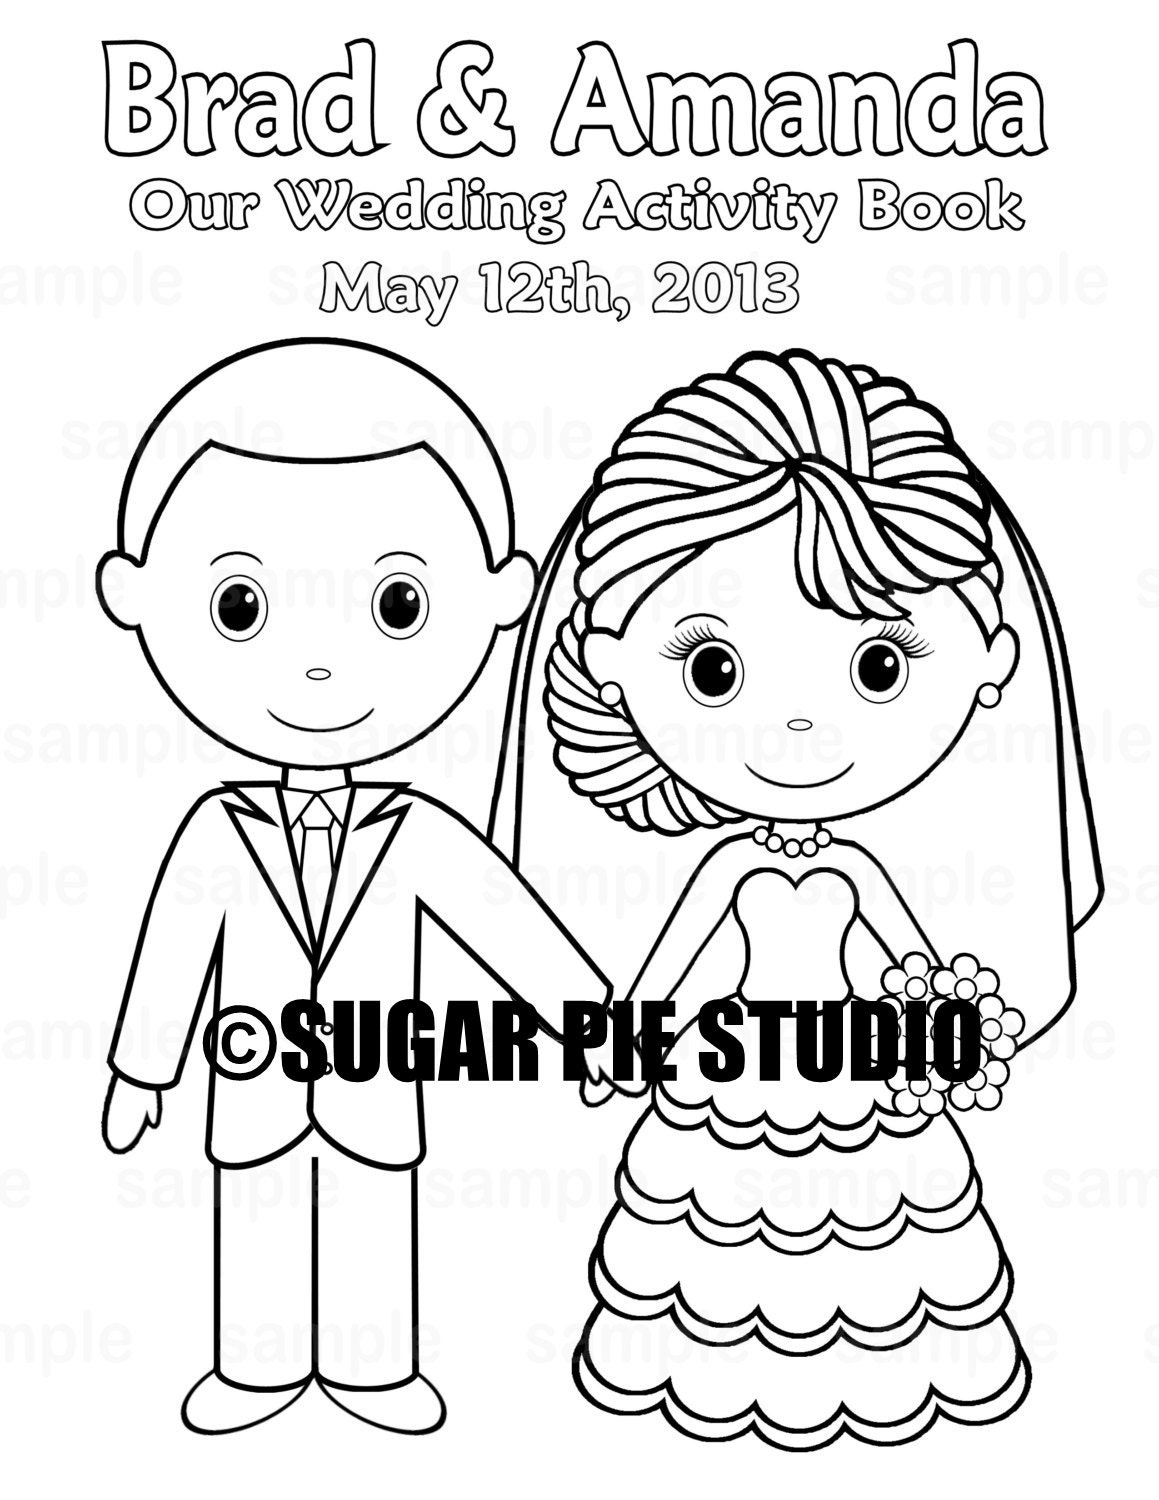 Printable Personalized Wedding Coloring Activity Book Favor Kids with Free Printable Personalized Wedding Coloring Book